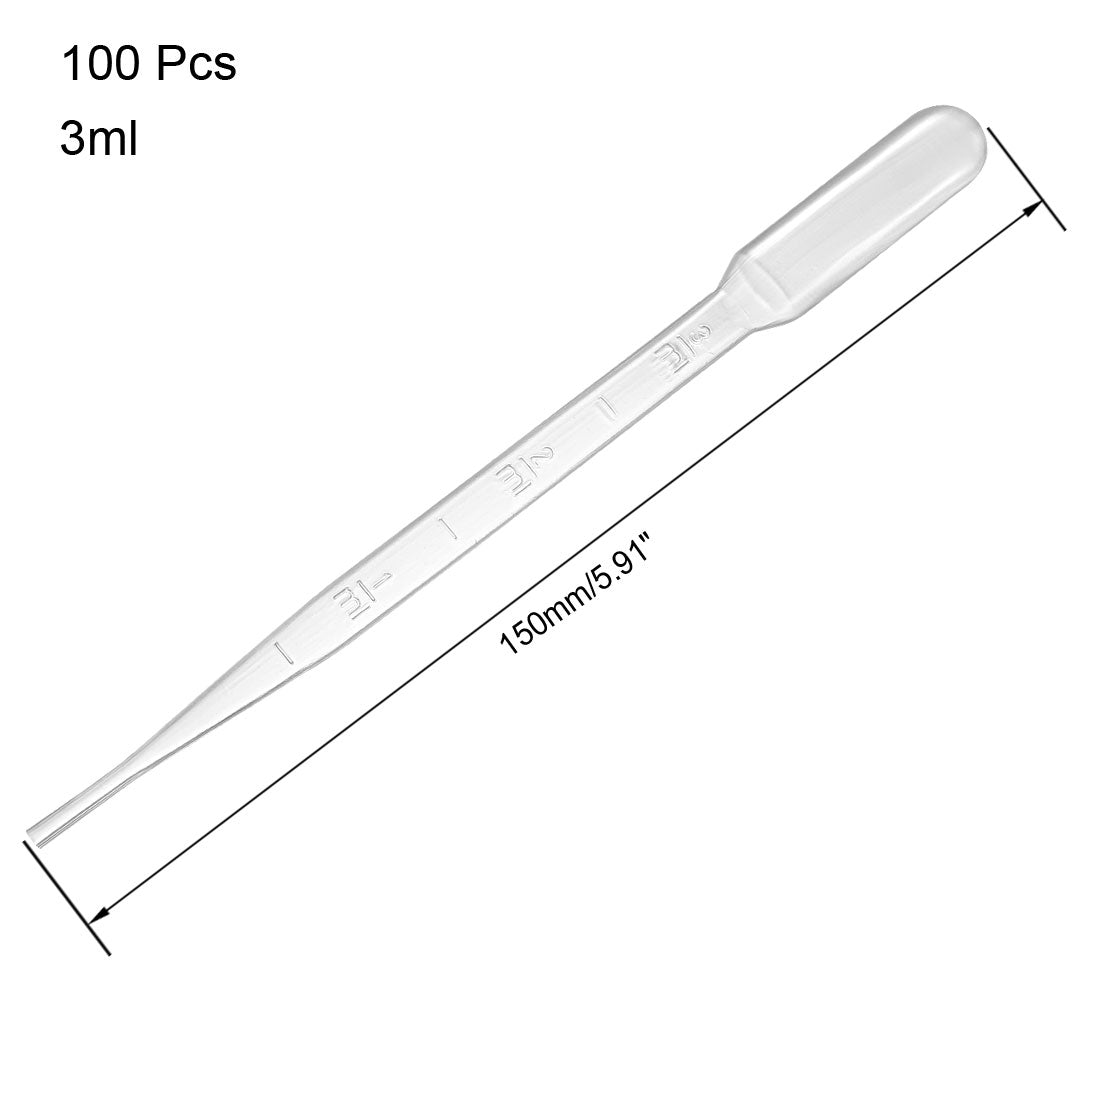 uxcell Uxcell 100 Pcs 3ml Disposable Pasteur Pipettes Test Tubes Liquid Drop Droppers Graduated 150mm Long